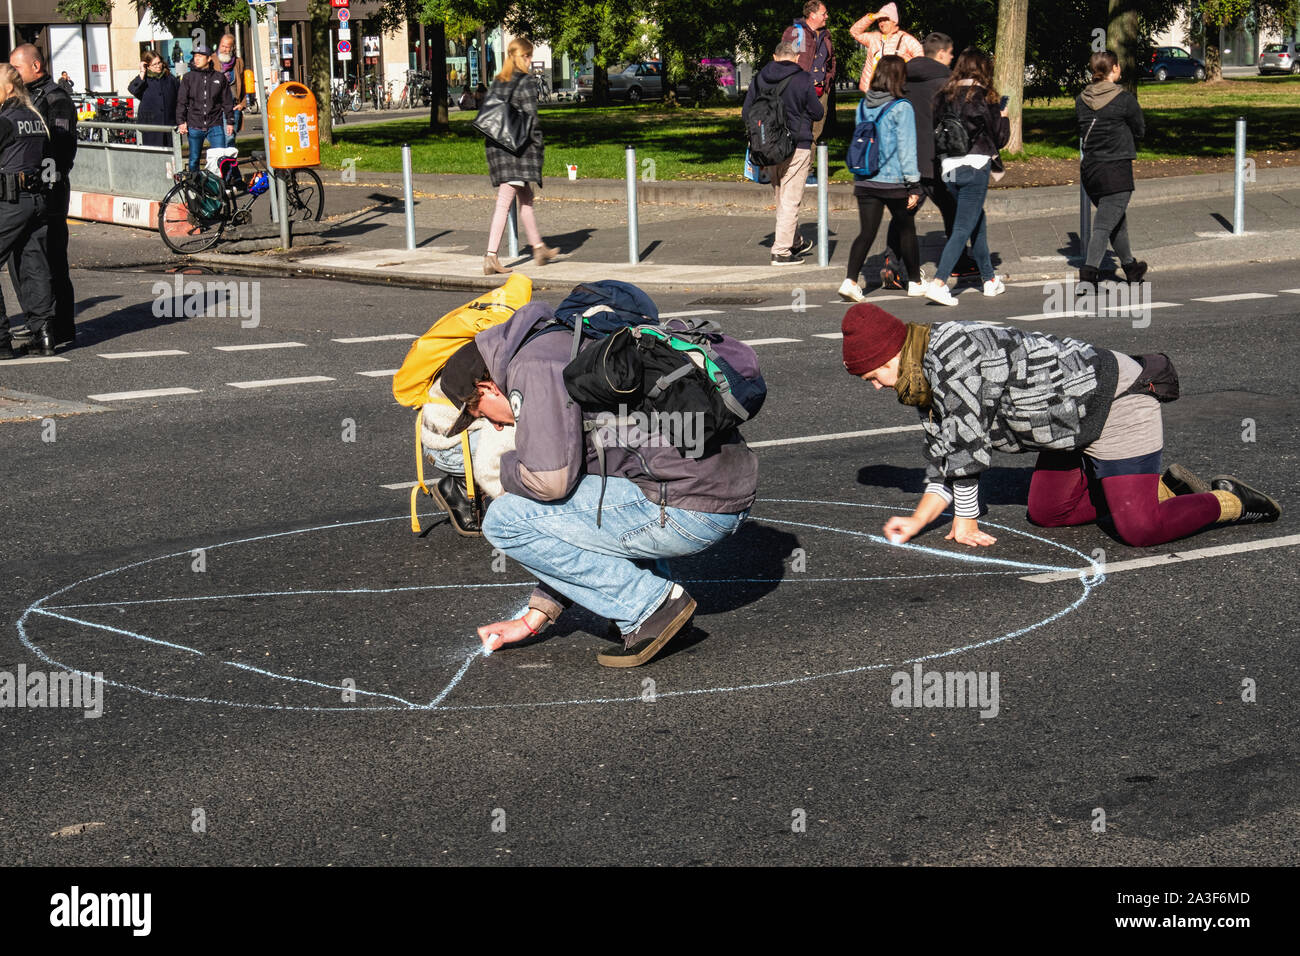 Germany, Berlin, Potsdamer Platz, 7th October 2019. Extinction Rebellion (XR) Protest in Berlin for more climate protection and the prevention of species extinction. . Demonstrators occupied a major traffic intersection at Potsdamer Platz and brought traffic to a halt. Credit: Eden Breitz/Alamy Stock Photo